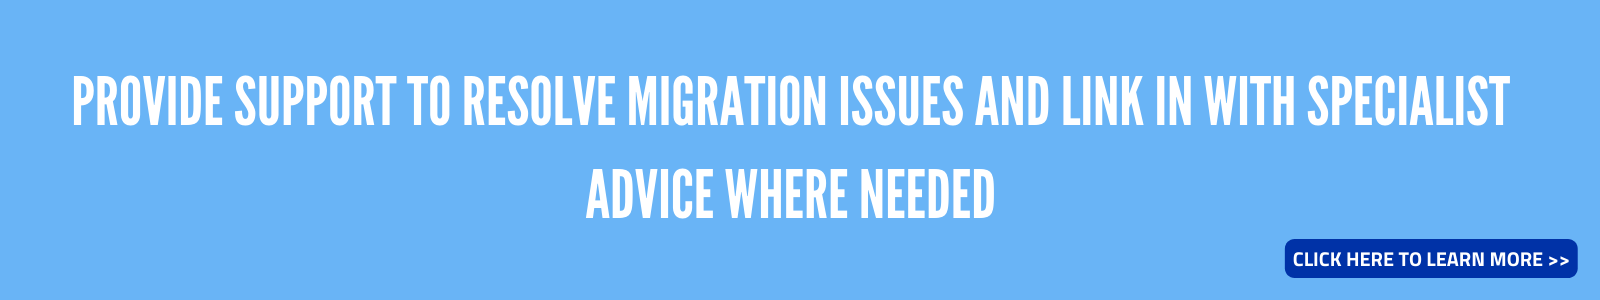 Provide support to resolve migration issues and link in with specialist advice where needed;